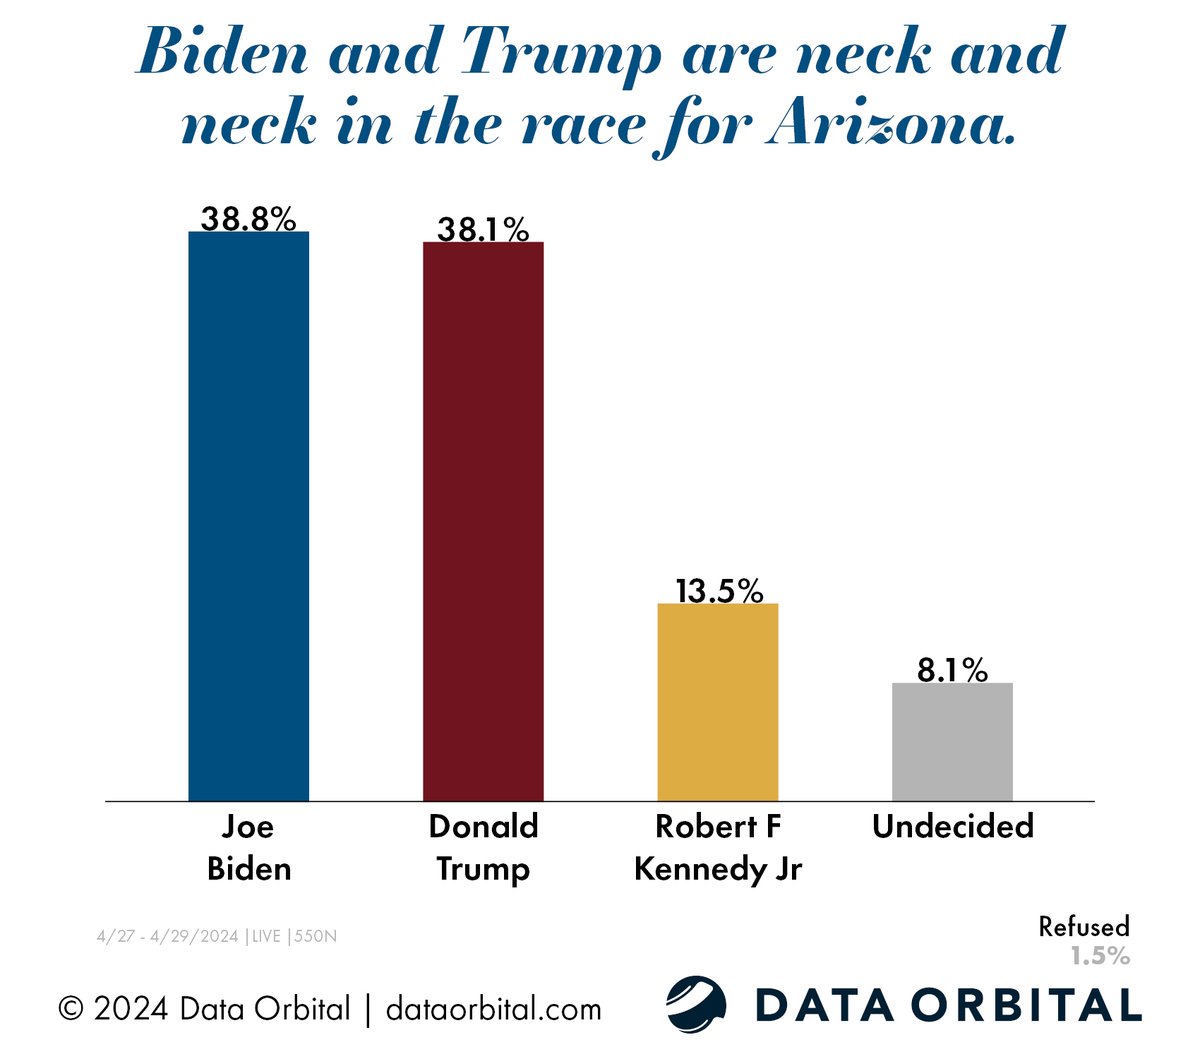 Data Orbital is pleased to release the results of our new AZ Statewide survey. #election2024 #electiontwitter #AZpolitics 

#AZ Statewide Likely GE Voter:

President:

Biden: 38.8%
Trump: 38.1%
Kennedy: 13.5%
Undecided: 8.1%